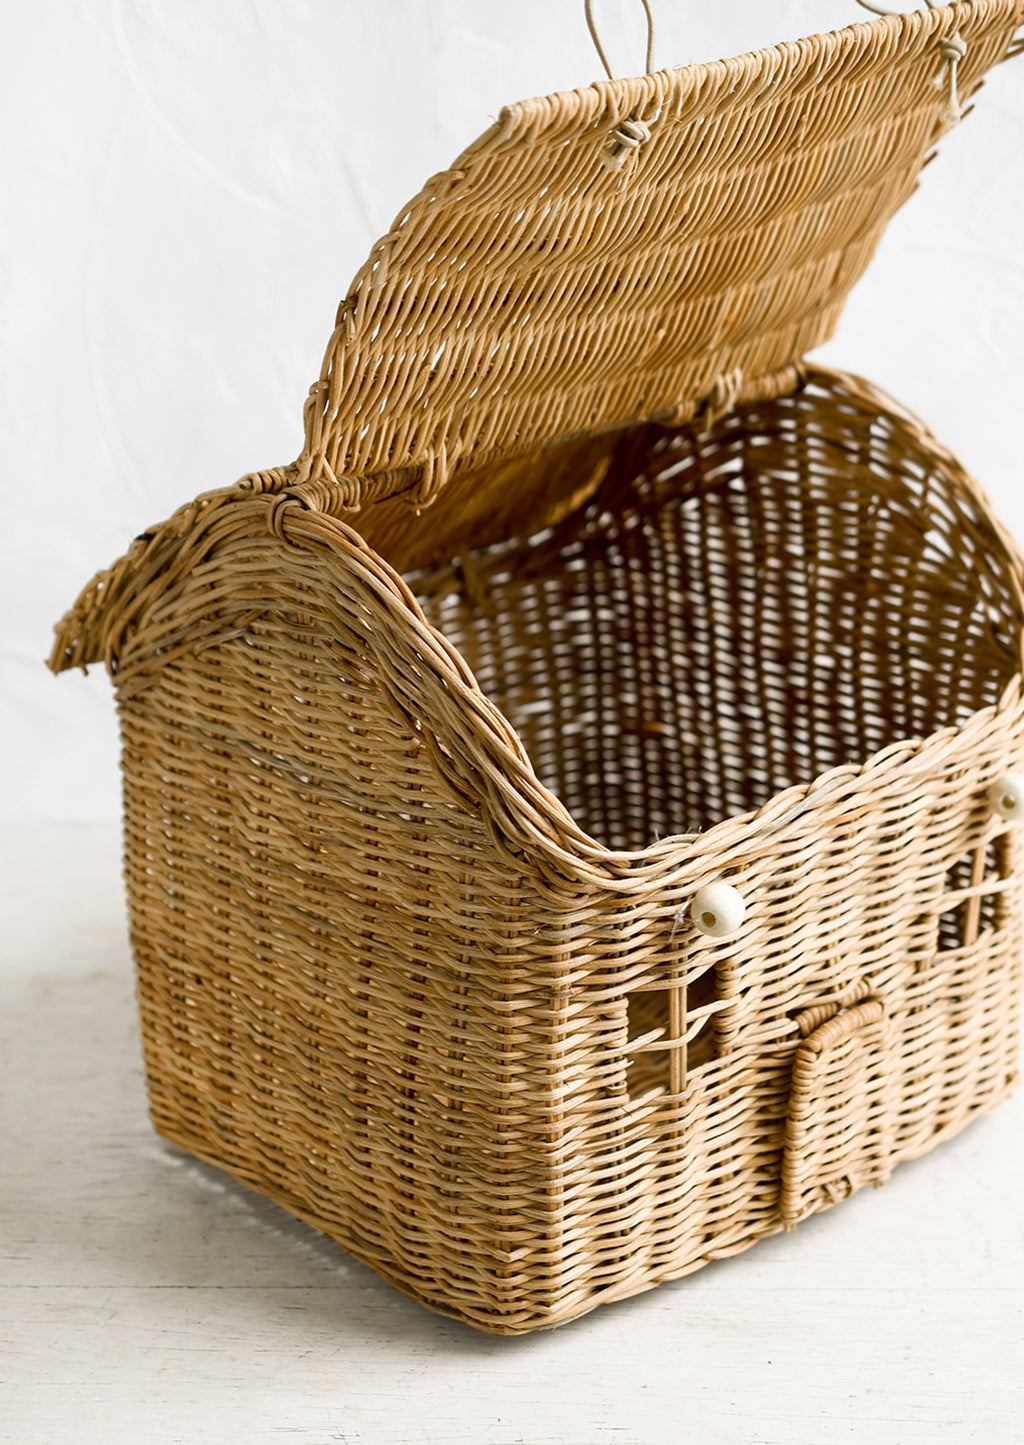 3: A rattan storage basket in the shape of a house.